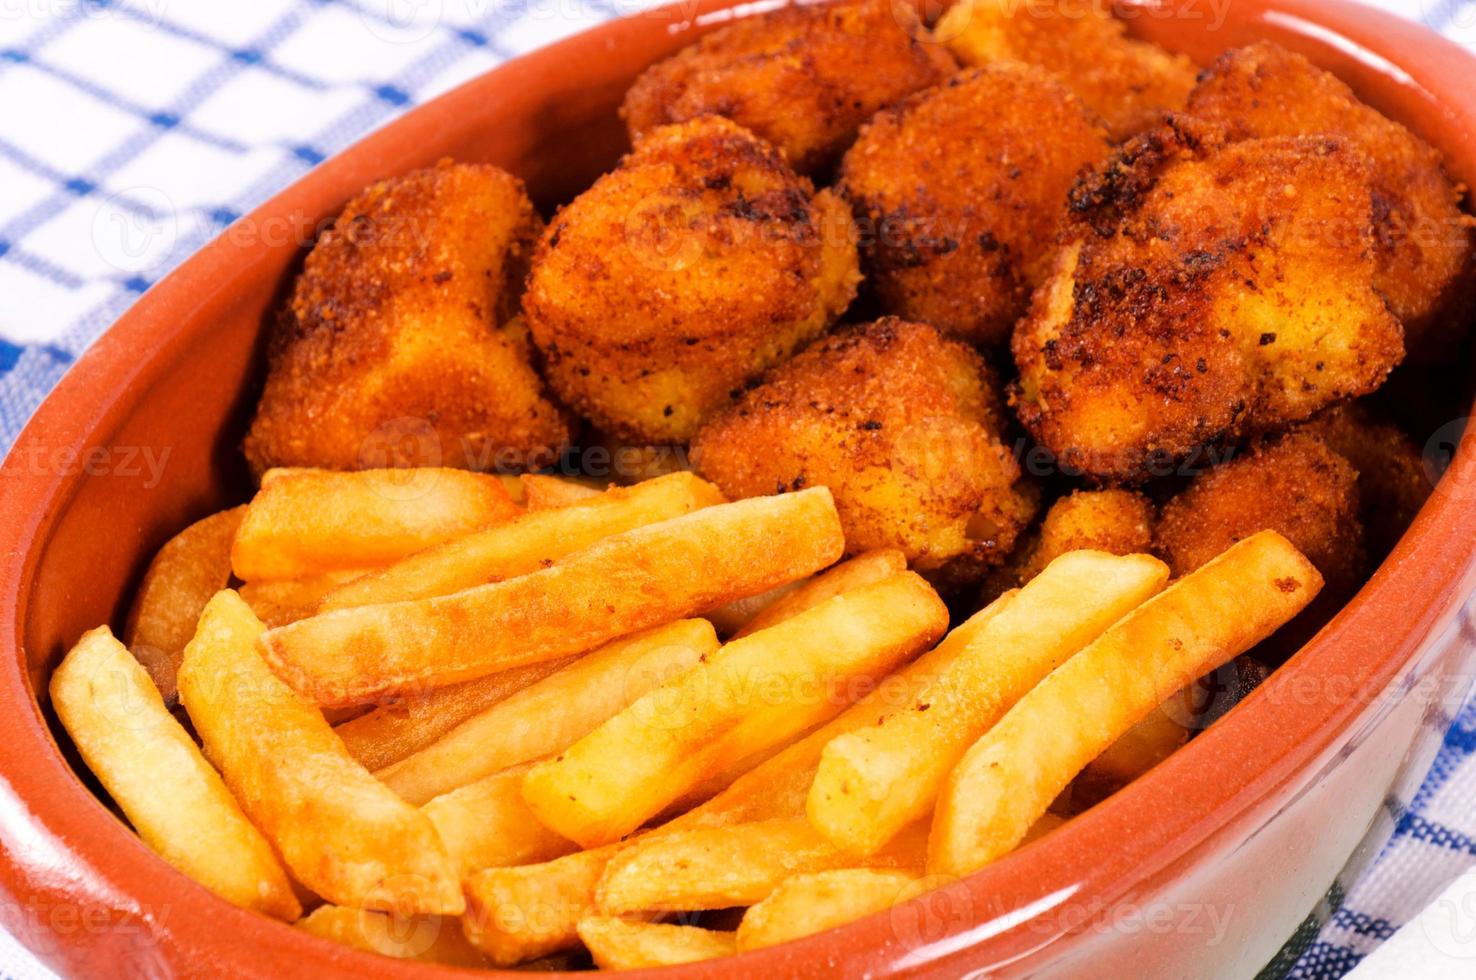 Chicken balls and french fries photo